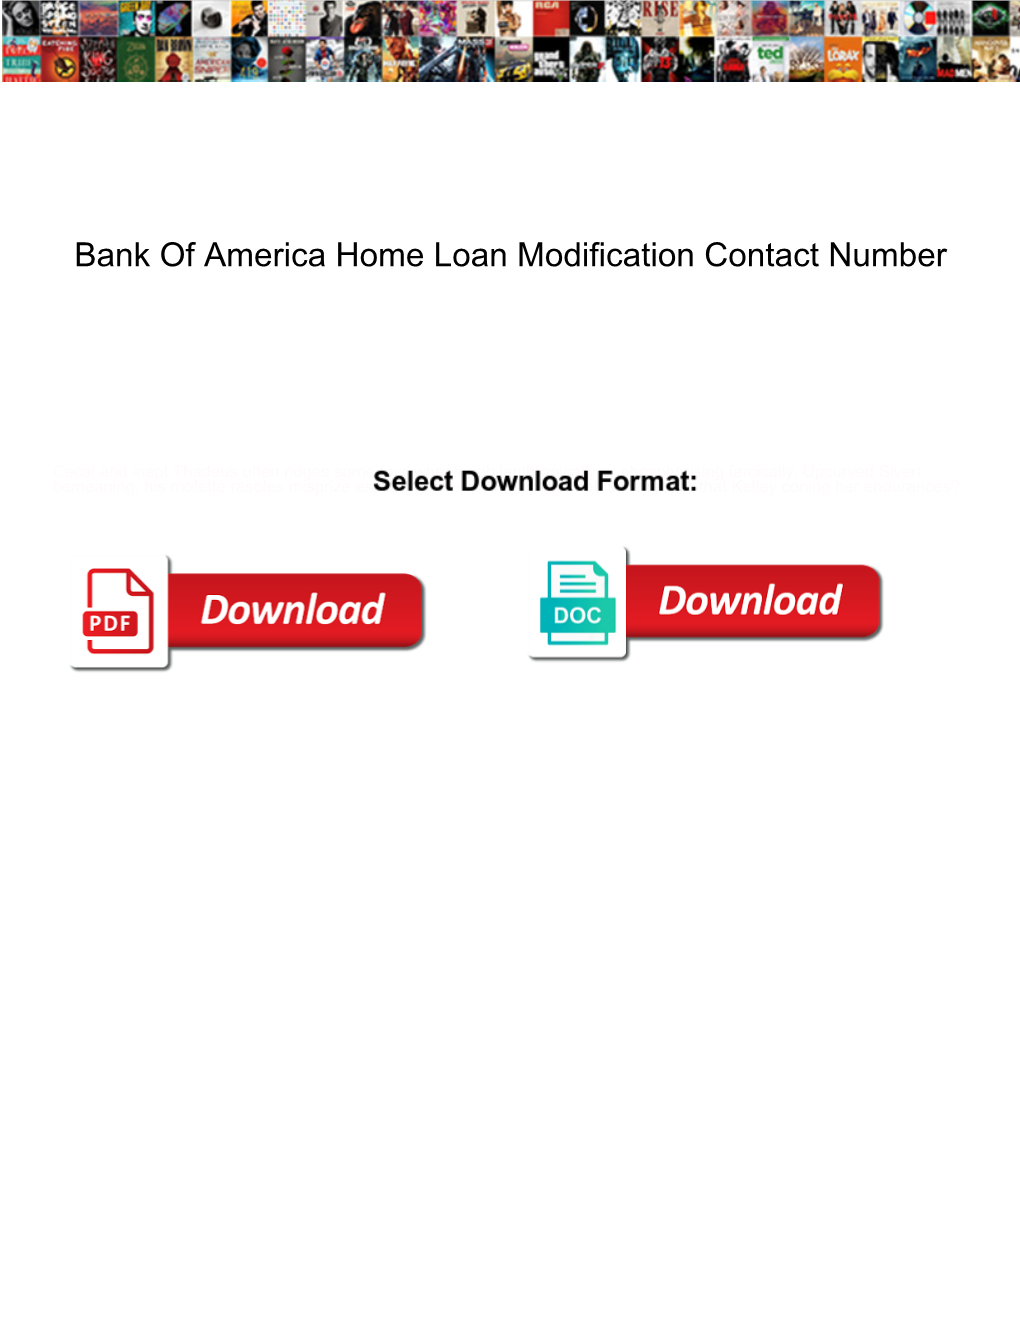 Bank of America Home Loan Modification Contact Number